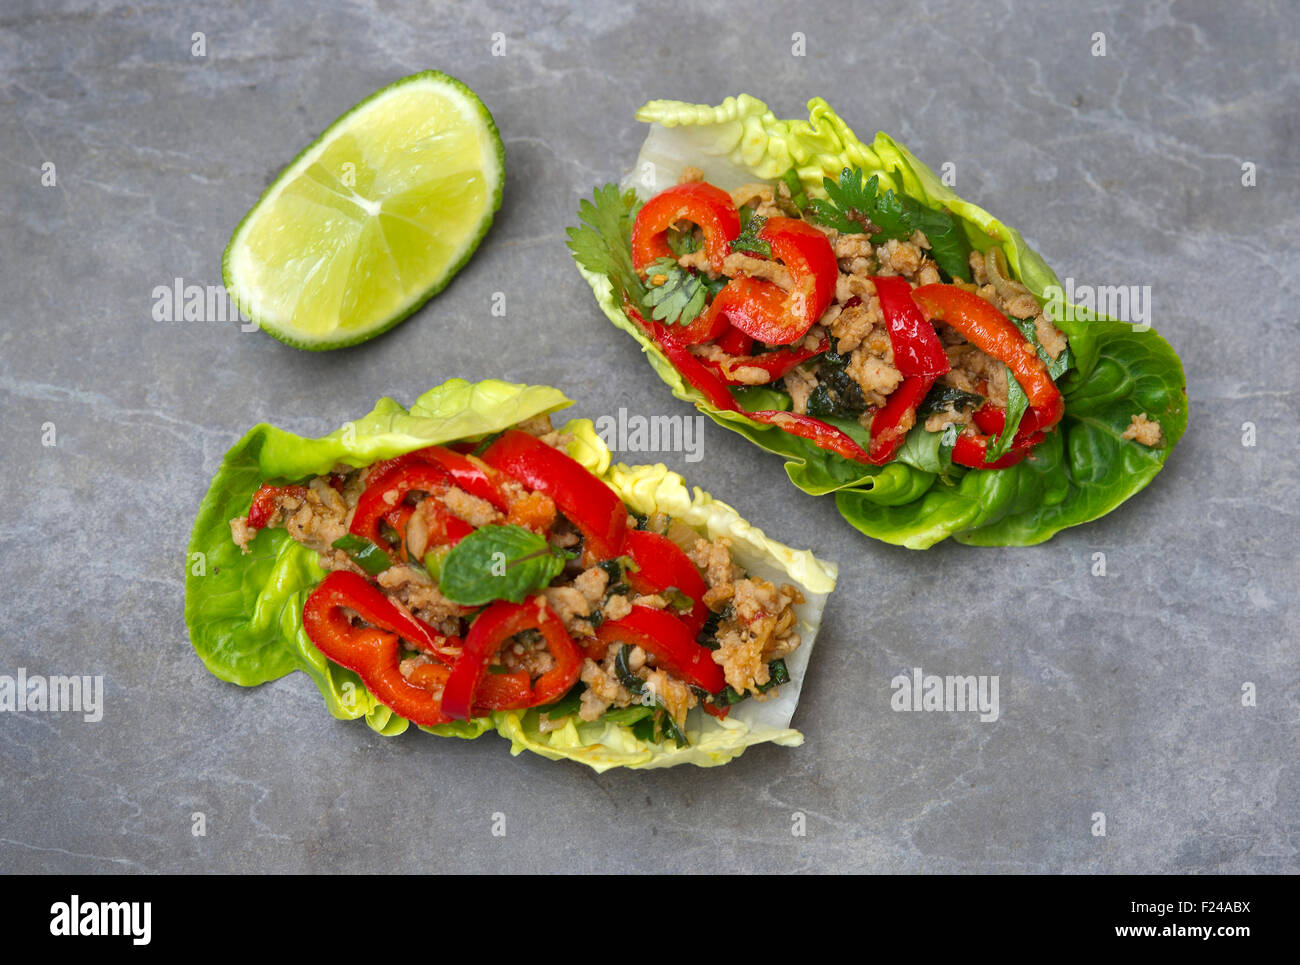 Paleo diet food, spicey lettuce wraps, supposedly based on 'cave man' Palaeolithic foods for health. a UK Stock Photo